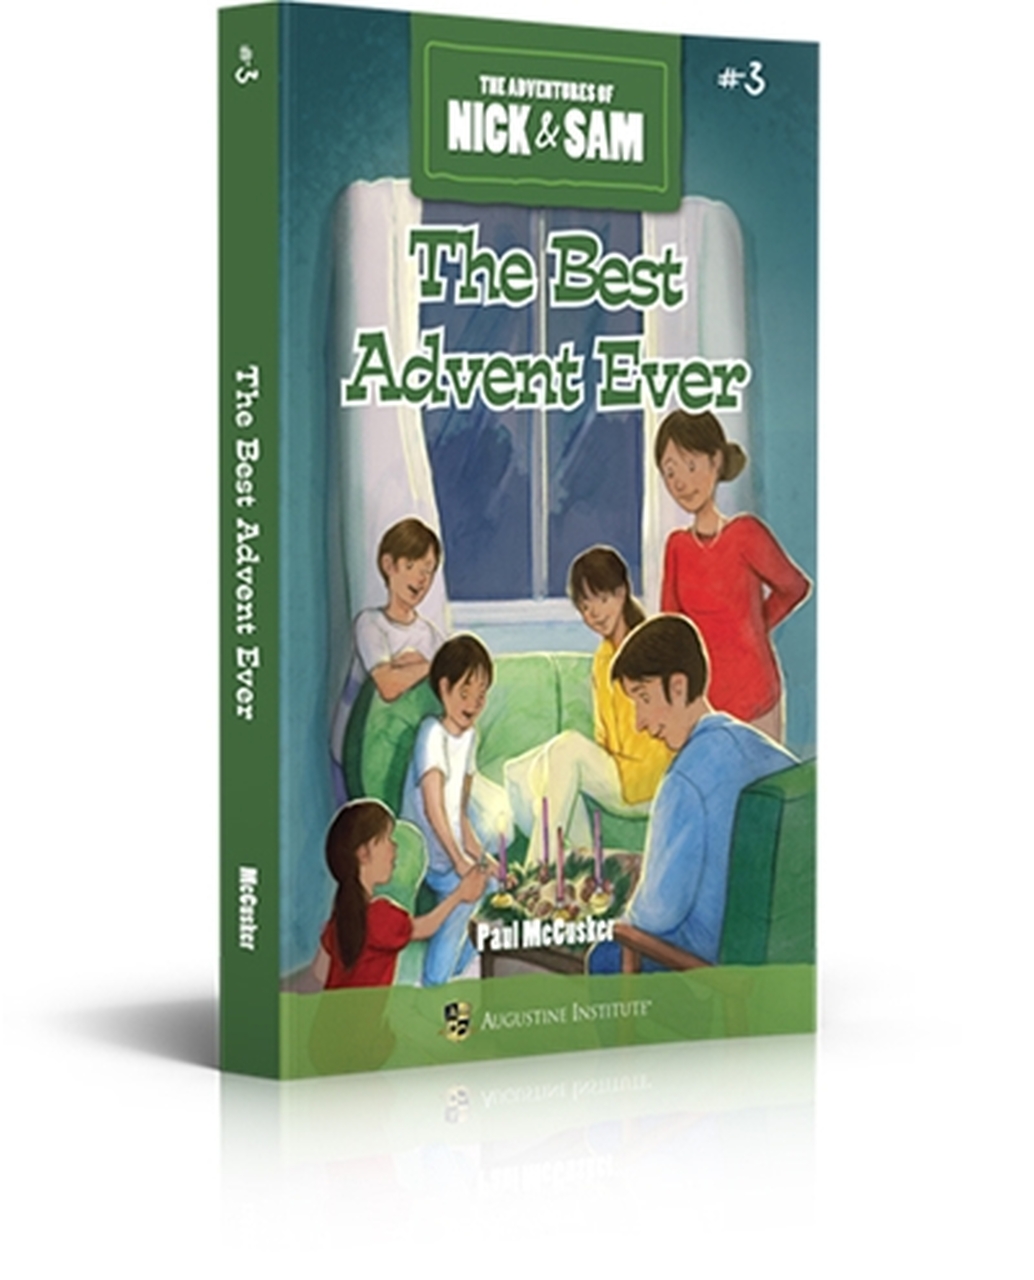 The Best Advent Ever The Adventures of Nick & Sam Book #3 Paul McCusker